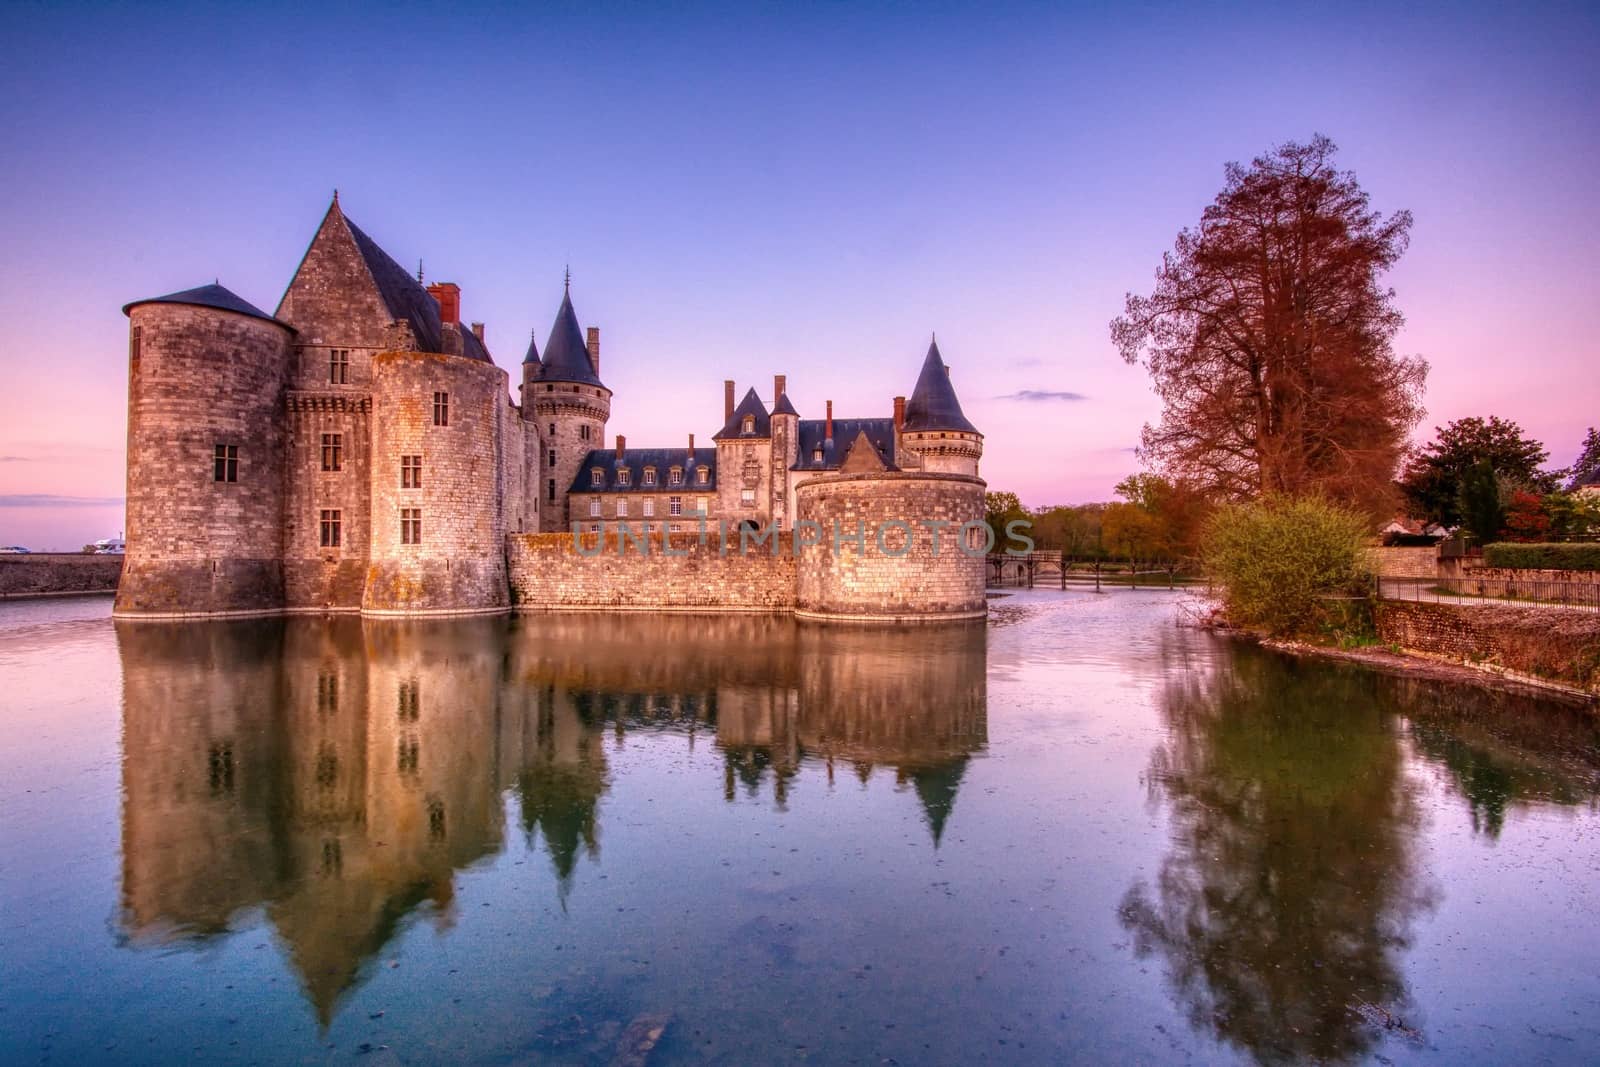 Sully Sur Loire, France - April 13, 2019: Famous medieval castle Sully sur Loire at sunrise, Loire valley, France. The chateau of Sully sur Loire dates from the end of the 14th century and is a prime example of medieval fortress.